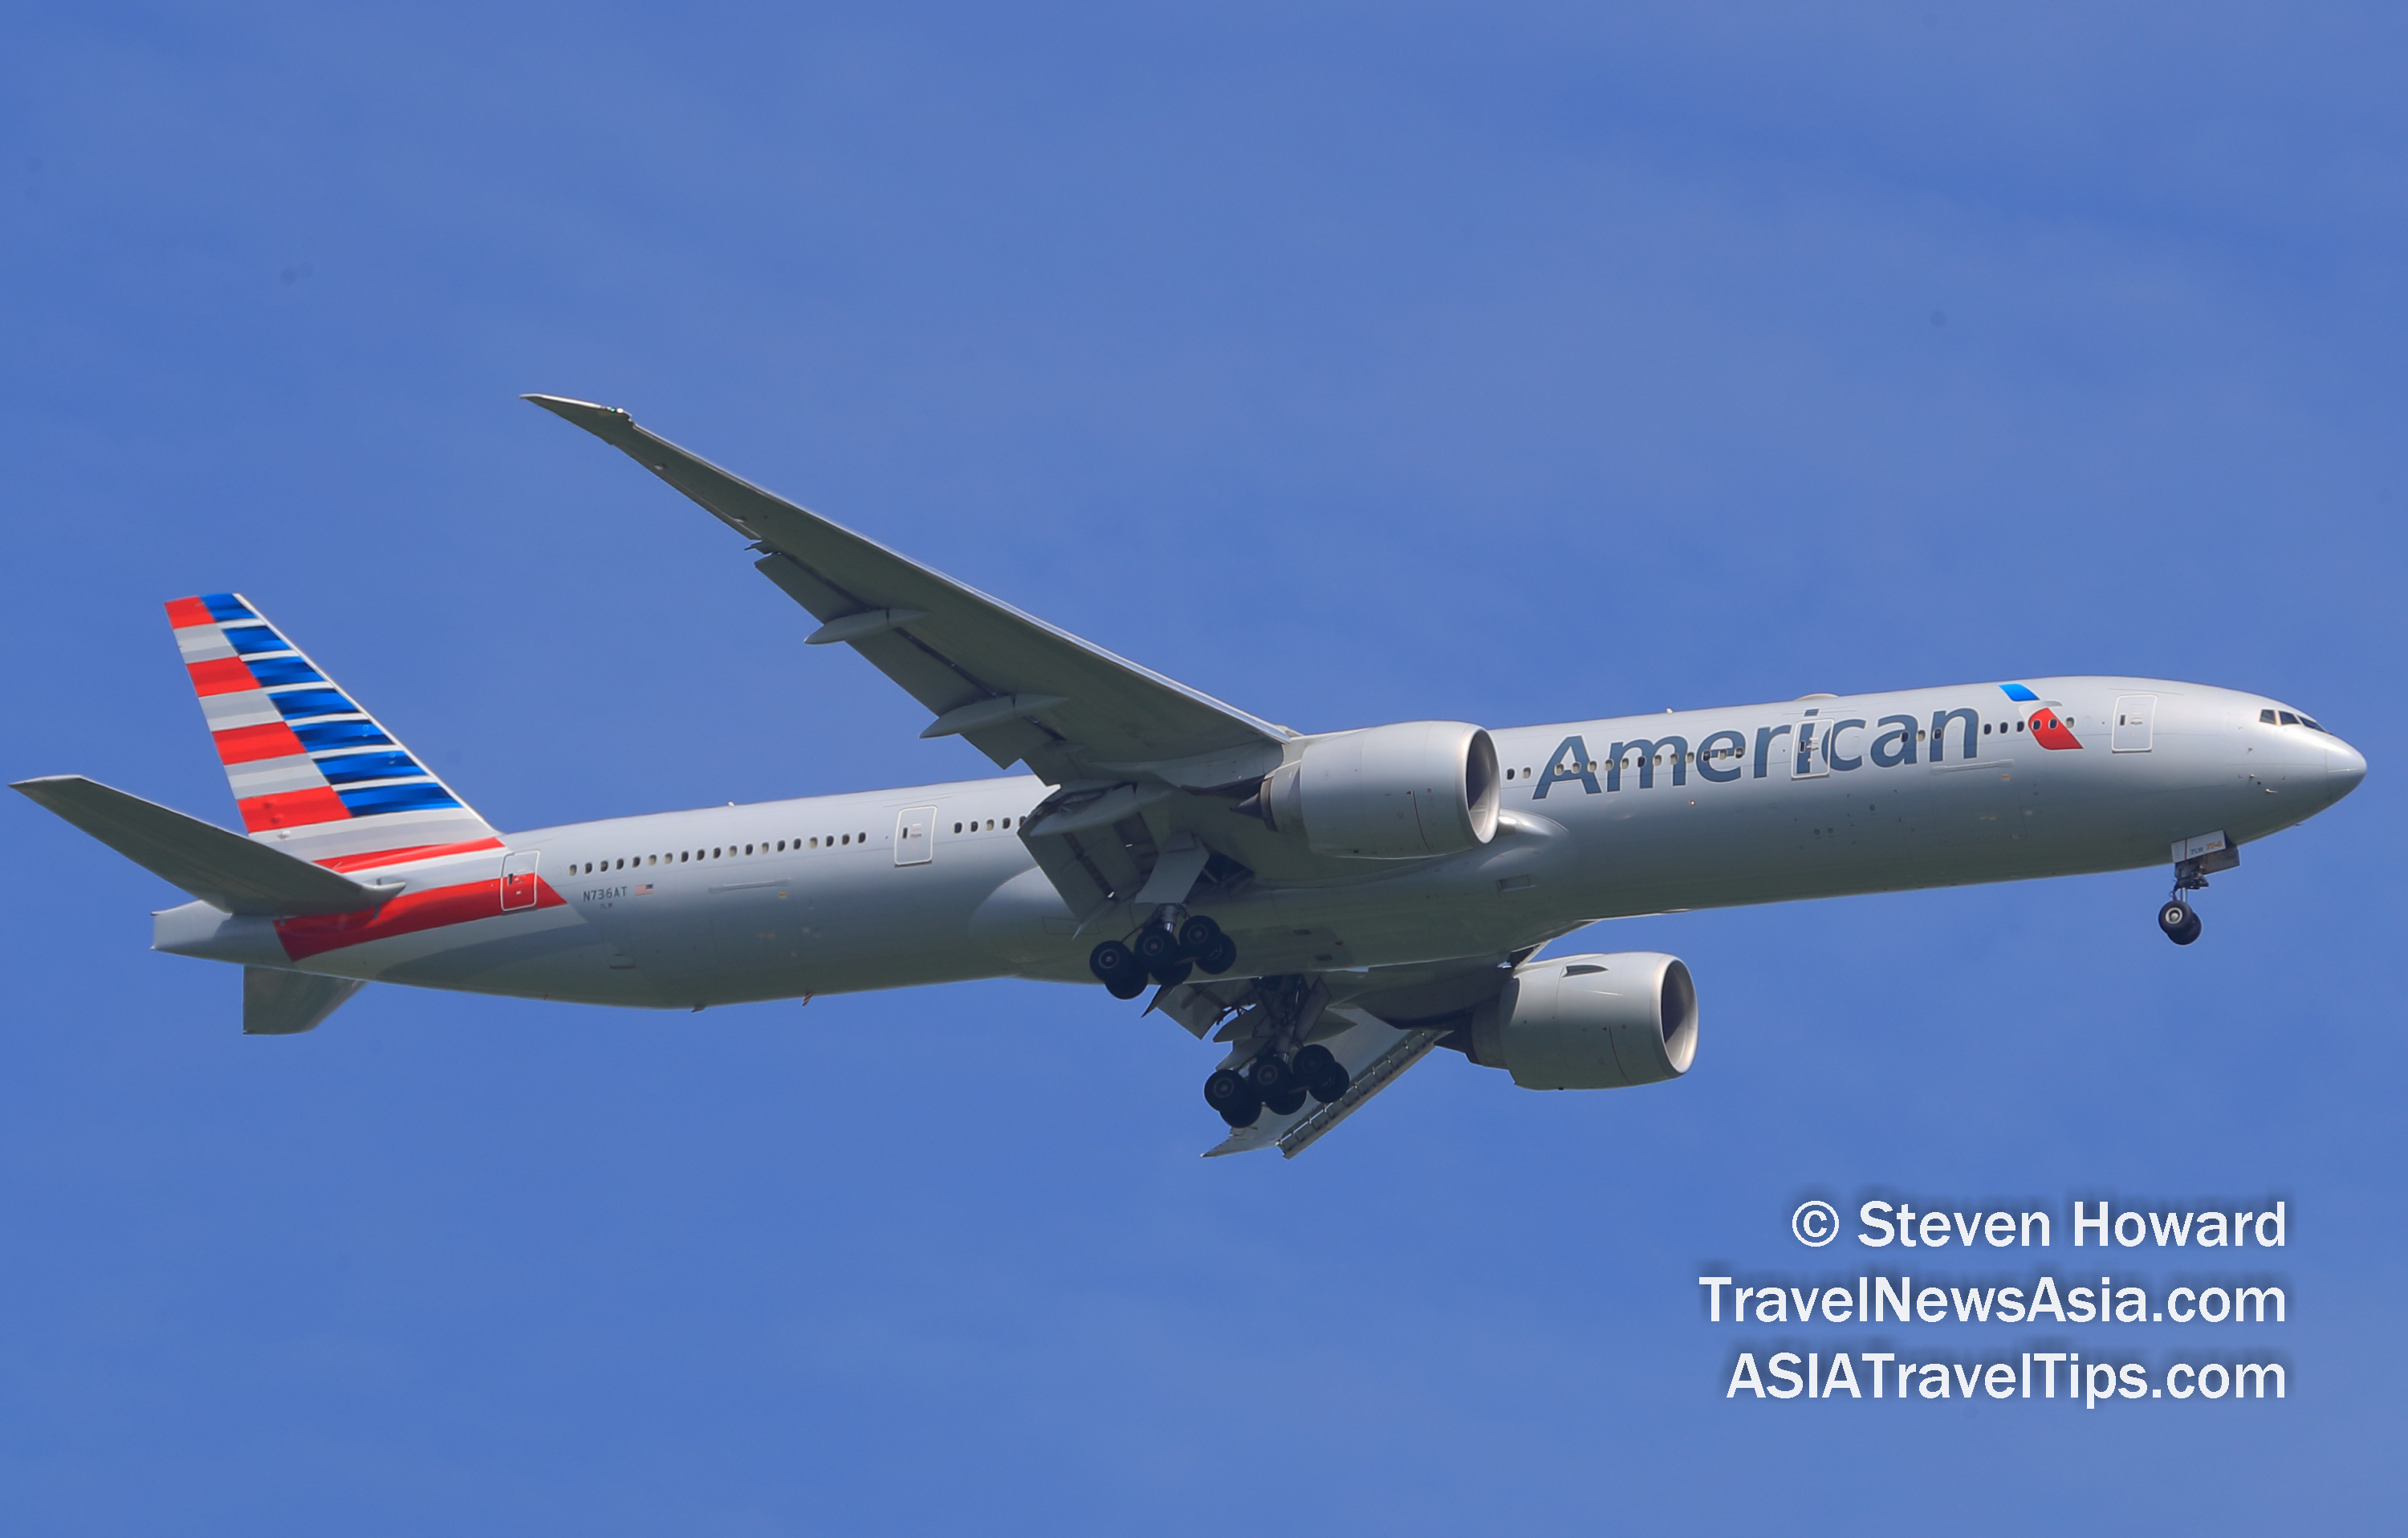 American Airlines Boeing 777 reg: N736AT. Picture by Steven Howard of TravelNewsAsia.com Click to enlarge.